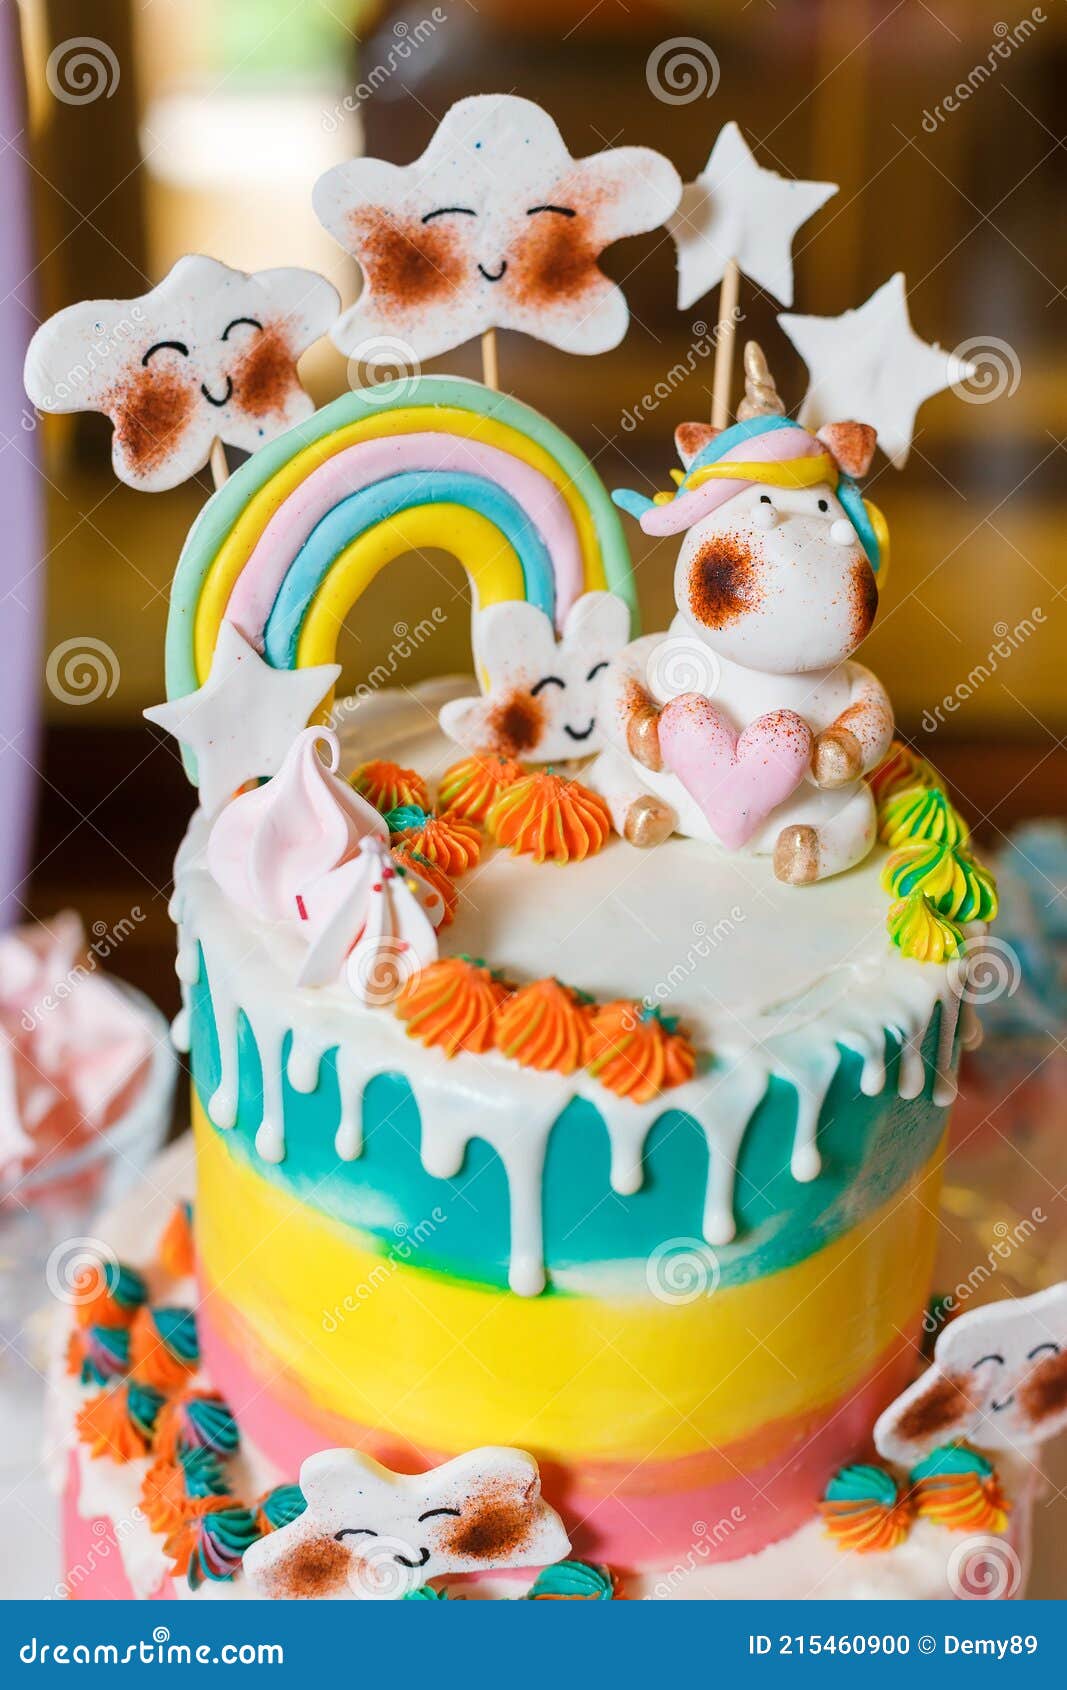 Big Cake on the Unicorn and Rainbow Theme. Sweets for Children ...